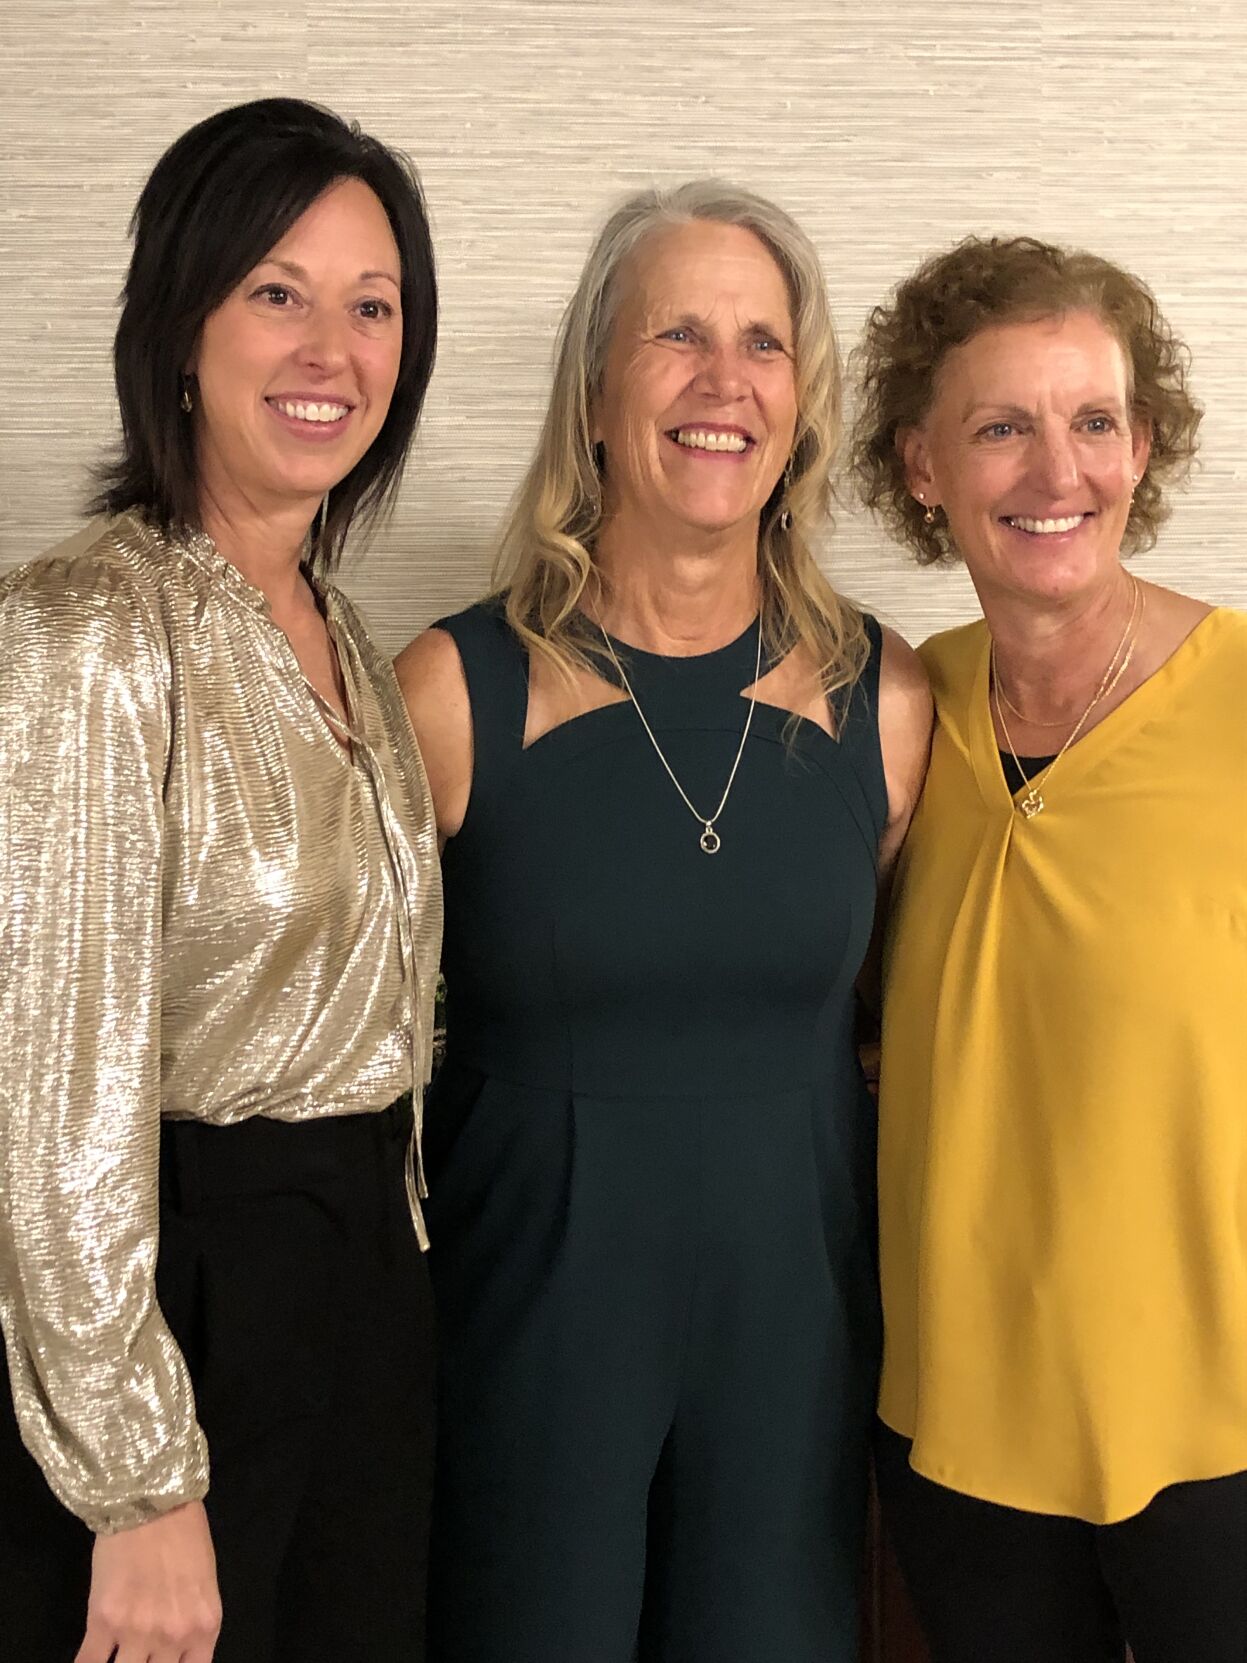 Bristol Eastern High School Alumni Inducted into Connecticut Women’s Volleyball Hall of Fame